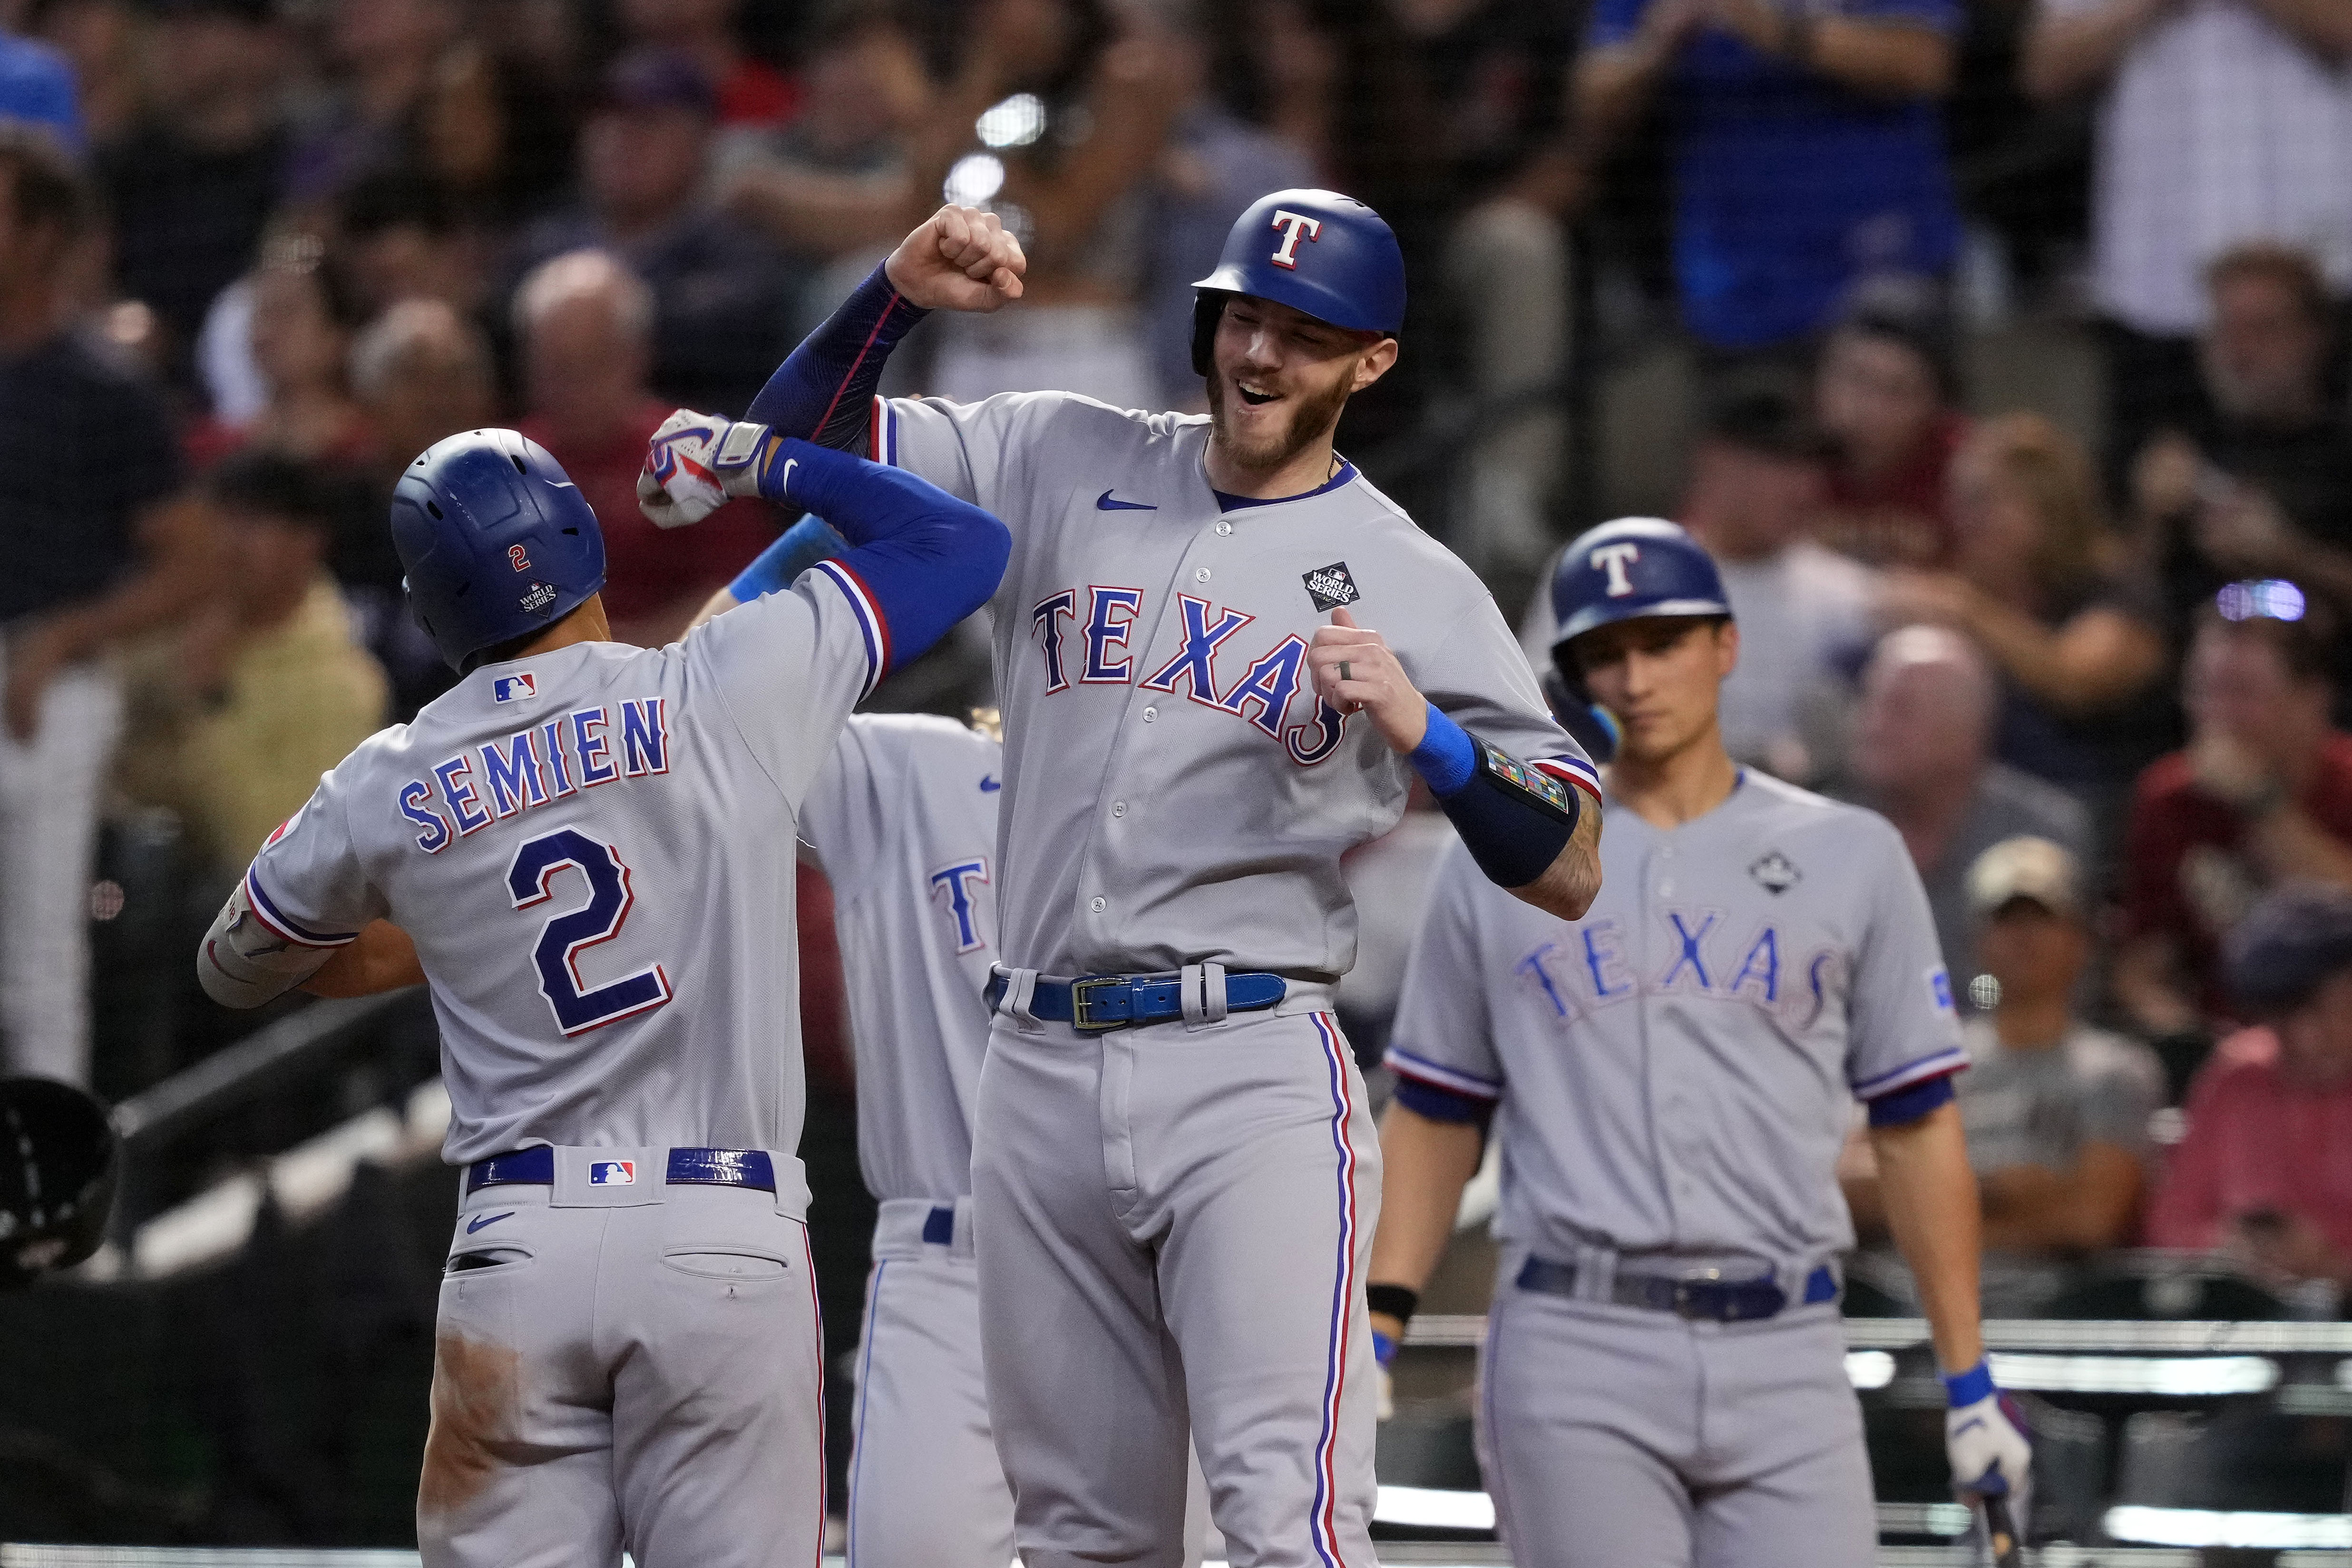 Marcus Semien celebrates his three-run home run with teammates in the third inning of the Texas Rangers' 11-7 Game 4 World Series win over the Arizona Diamondbacks Tuesday at Chase Field in Phoenix.